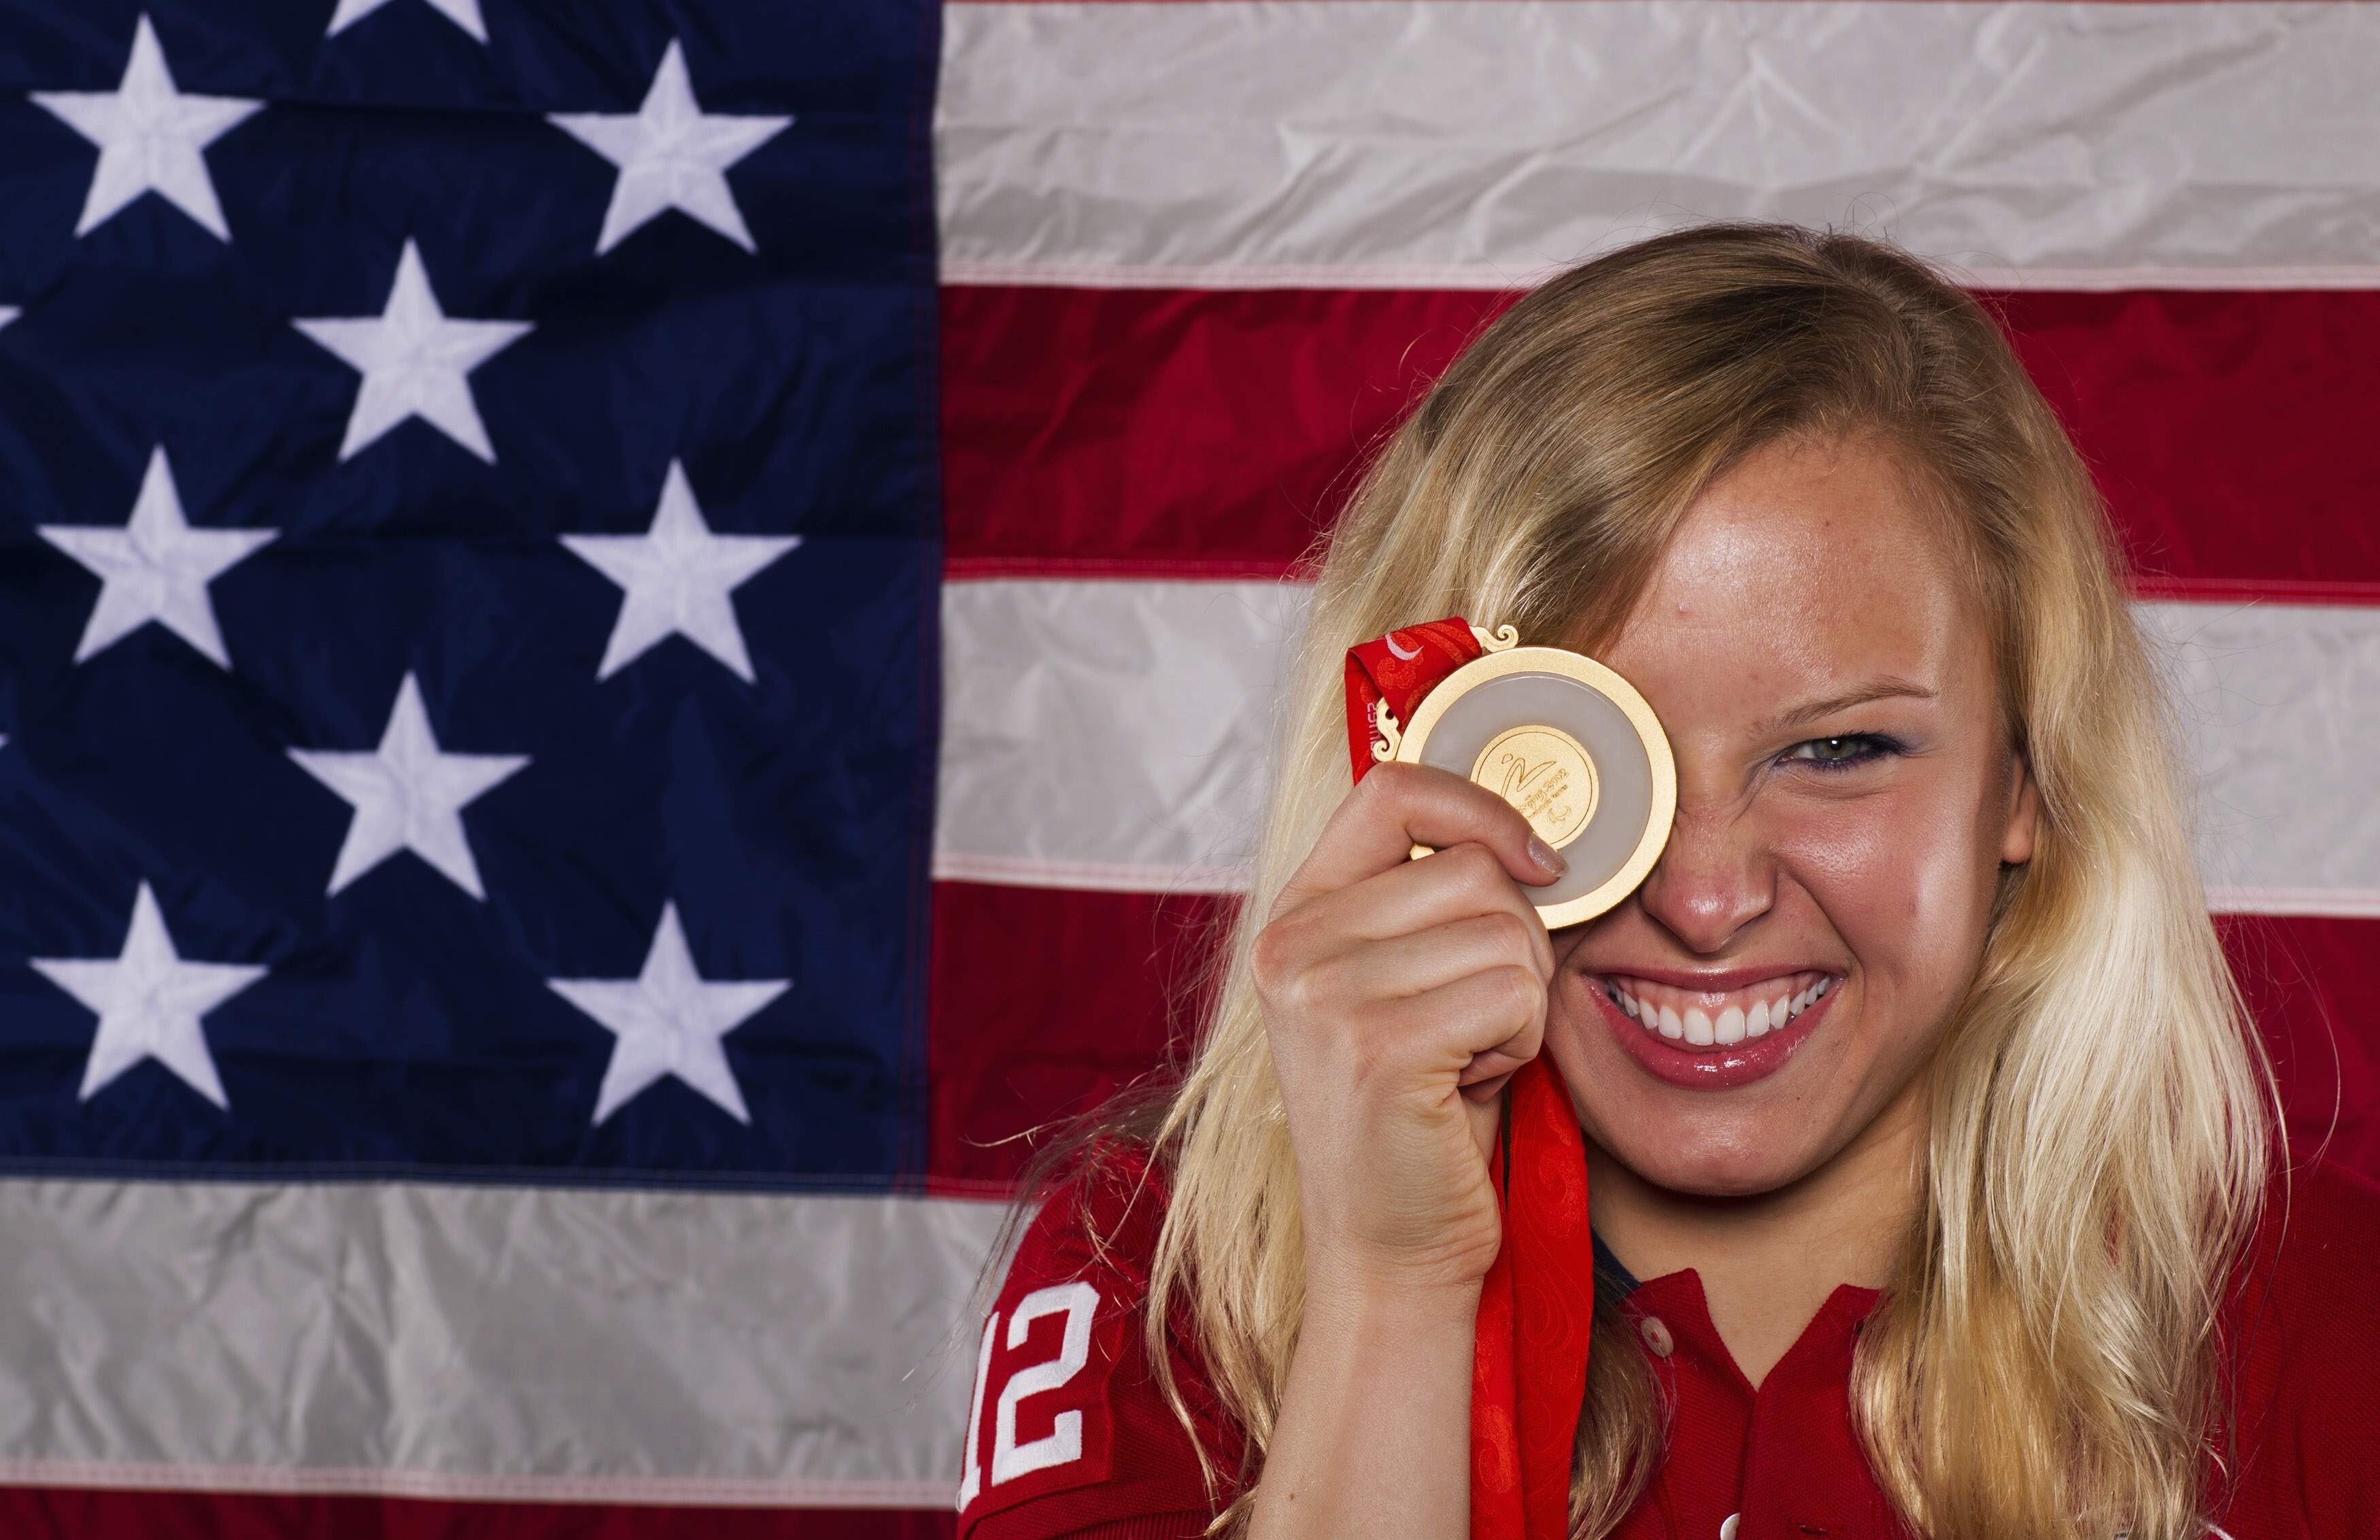 Paralympic swimmer Jessica Long holds up a gold medal as she poses for a portrait during the 2012 US Olympic Team Media Summit. Long is competing in the Tokyo 2020 Paralympic Games. Photo: Reuters